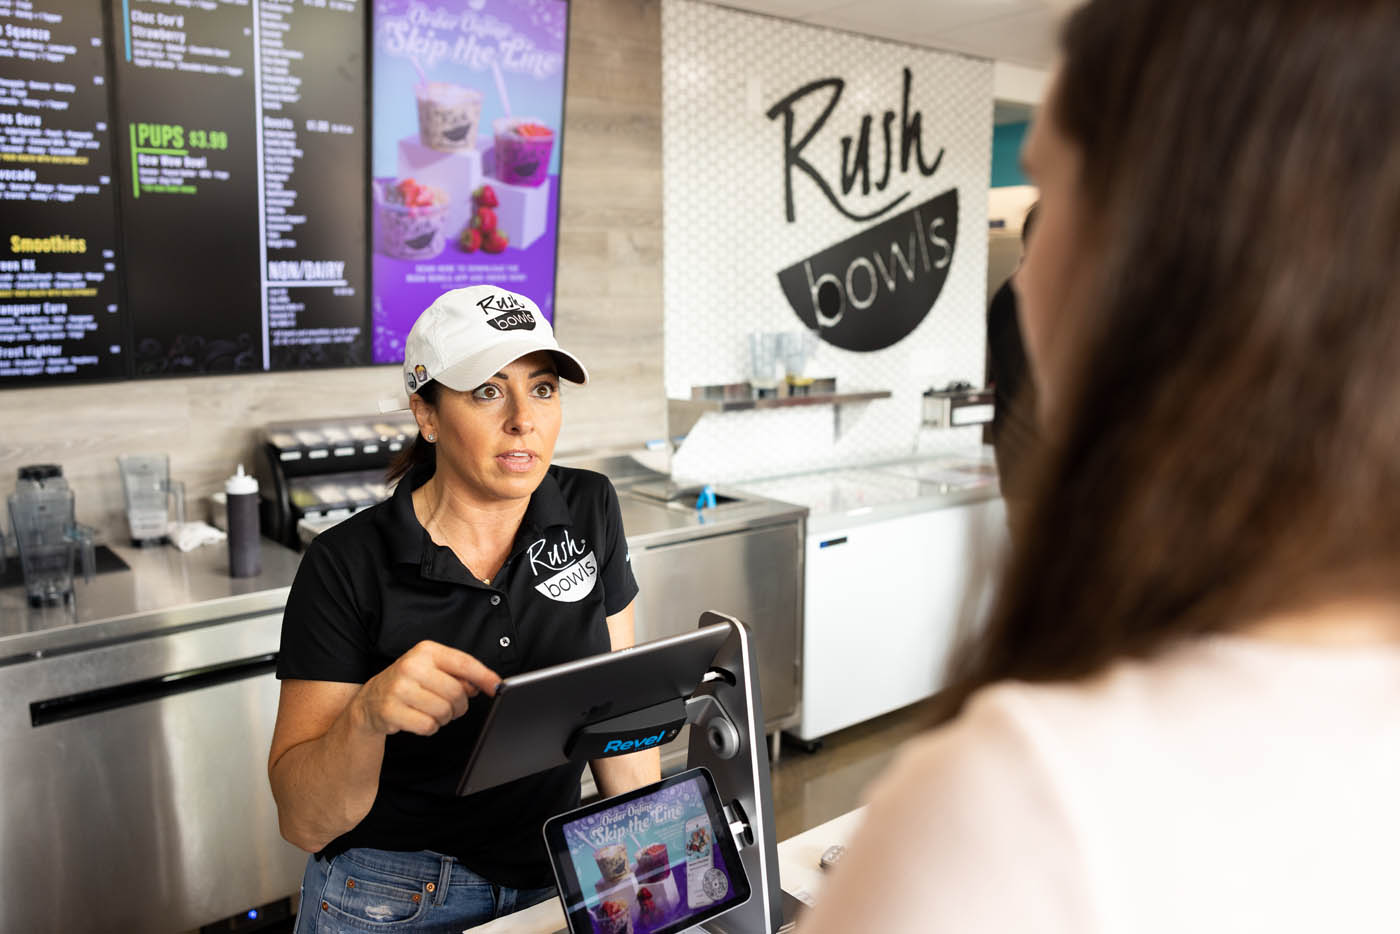 These three young women sip on Rush Bowls smoothies and are consistent customers in the health food industry.